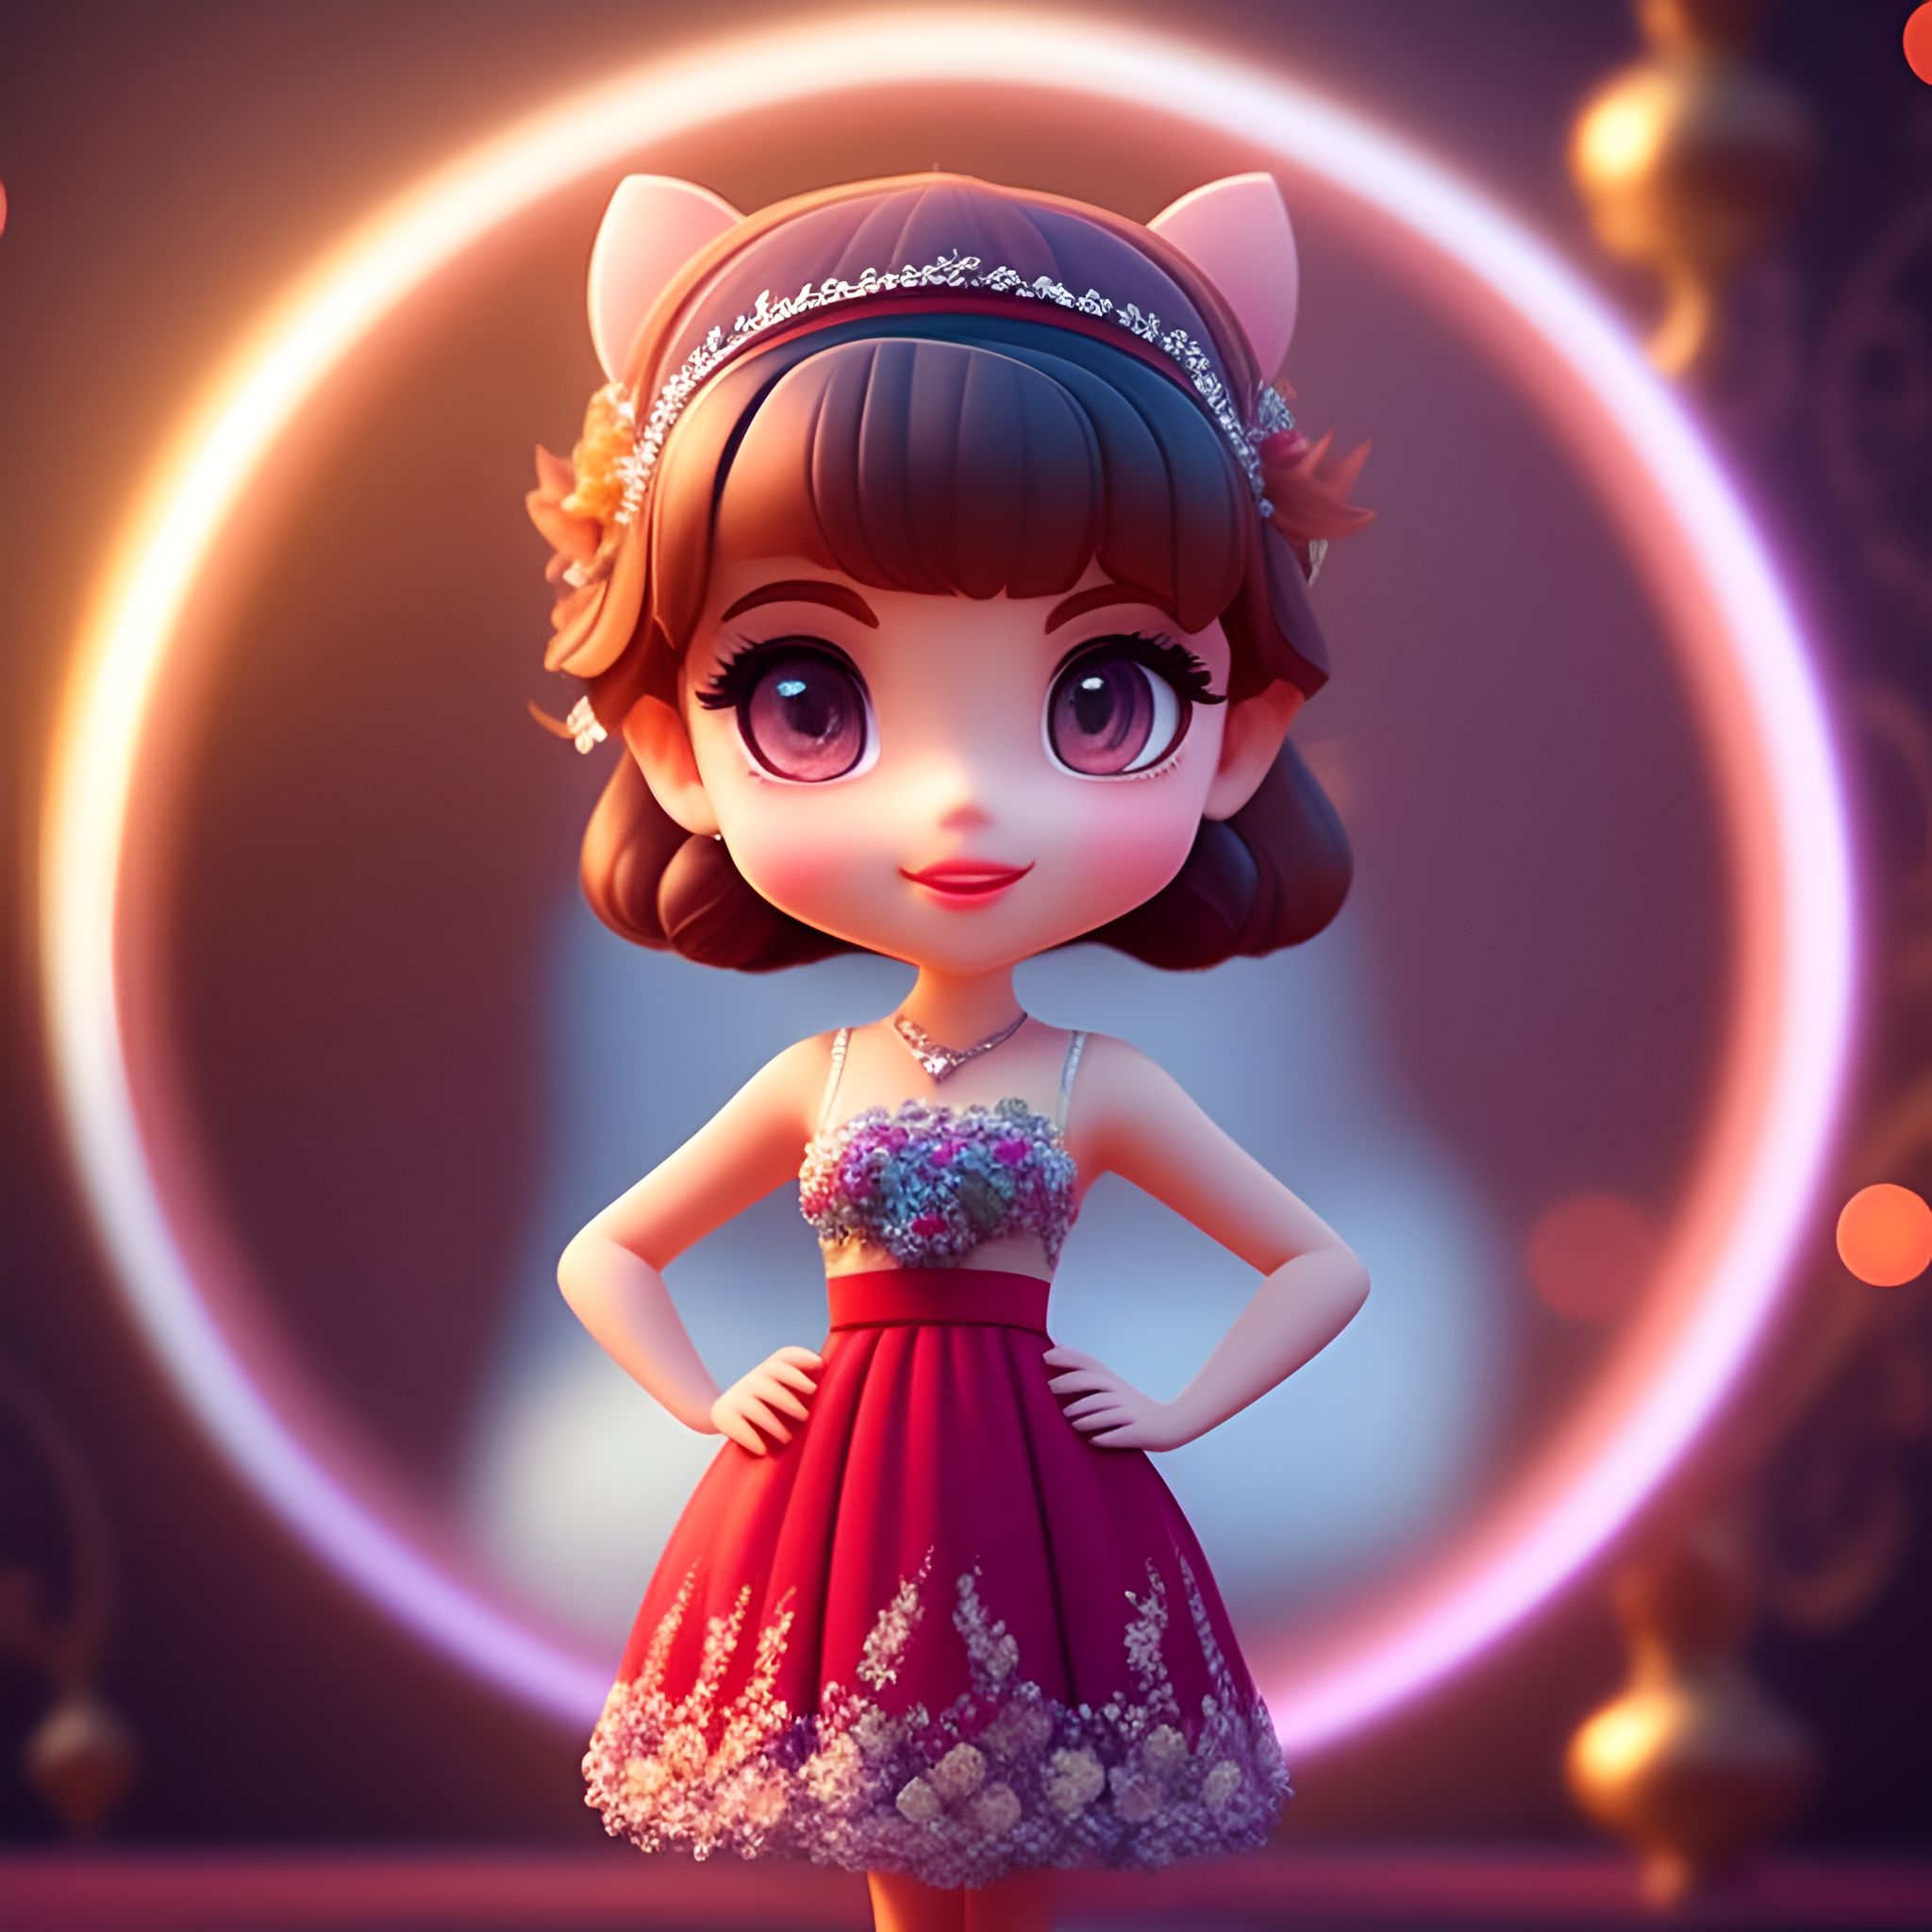 standing centered, Pixar style, 3d style, disney style, 8k, Beautiful, Woman, in floral dress, romantic vibes, cute, nendoroid, ethereal, Pinterest aesthetics , 3D style rendered in 8k using beautiful Disney like animation